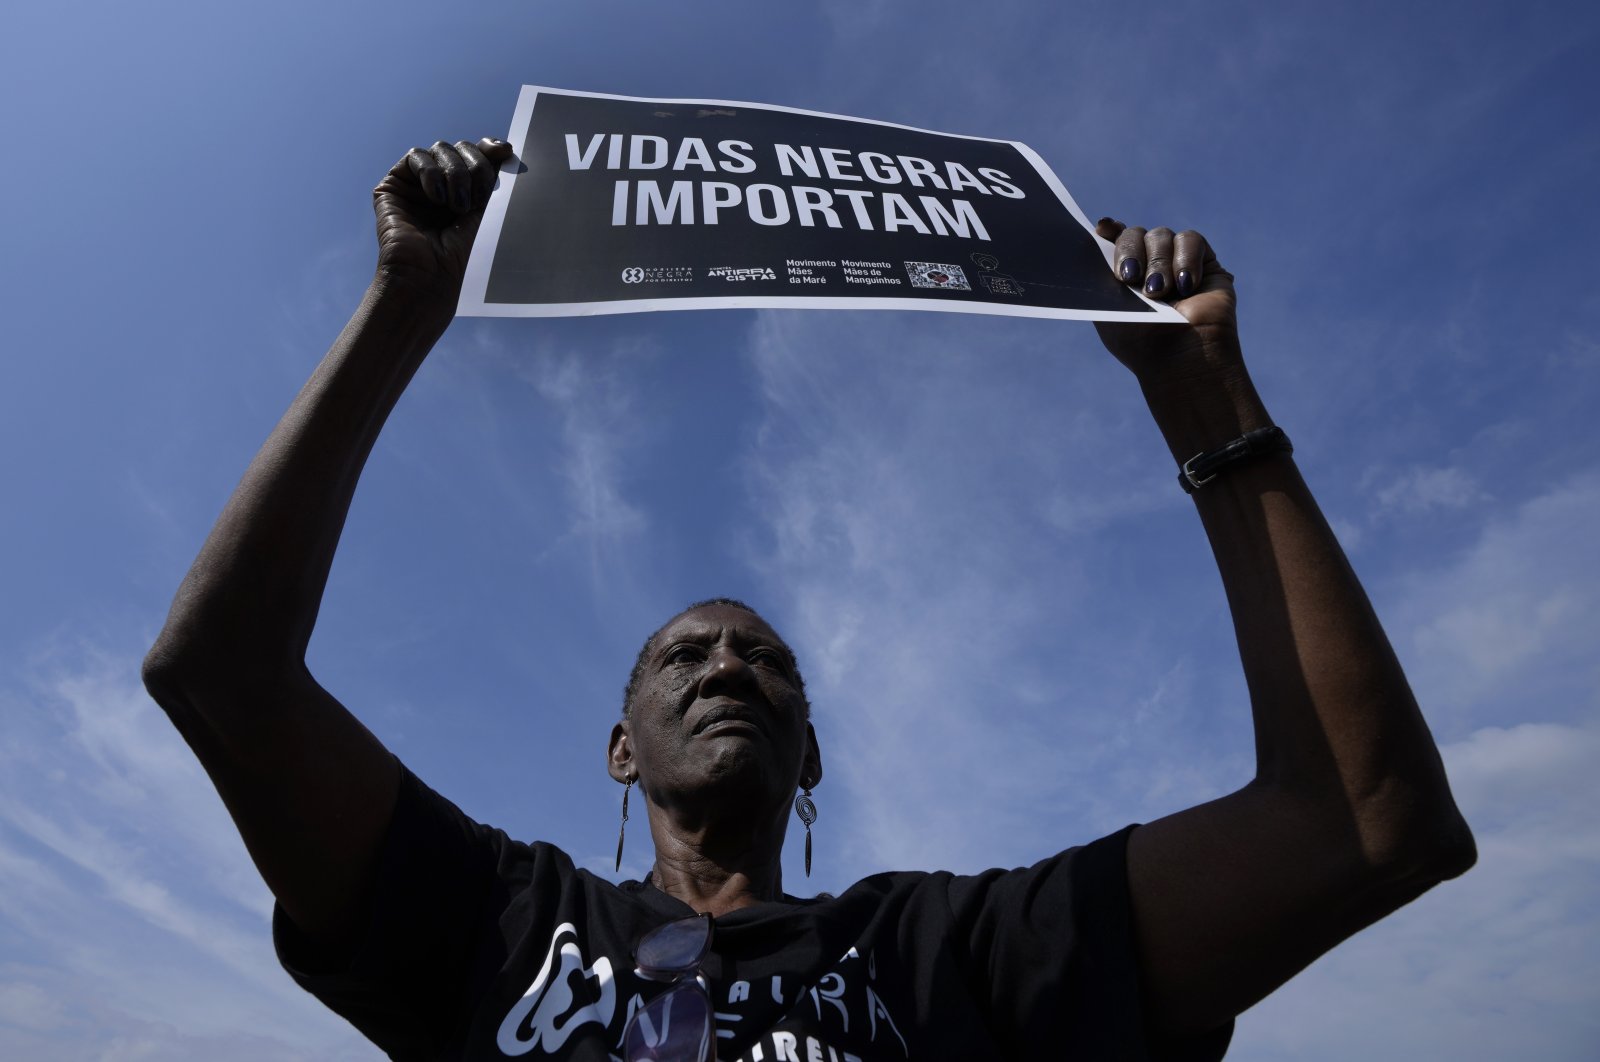 Zilda Maria de Paula, who said her 16-year-old son was killed during a police operation, holds a Portuguese "Black Lives Matter" poster during a protest demanding justice outside the Supreme Court in Brasilia, Brazil, May 12, 2022, (AP Photo)